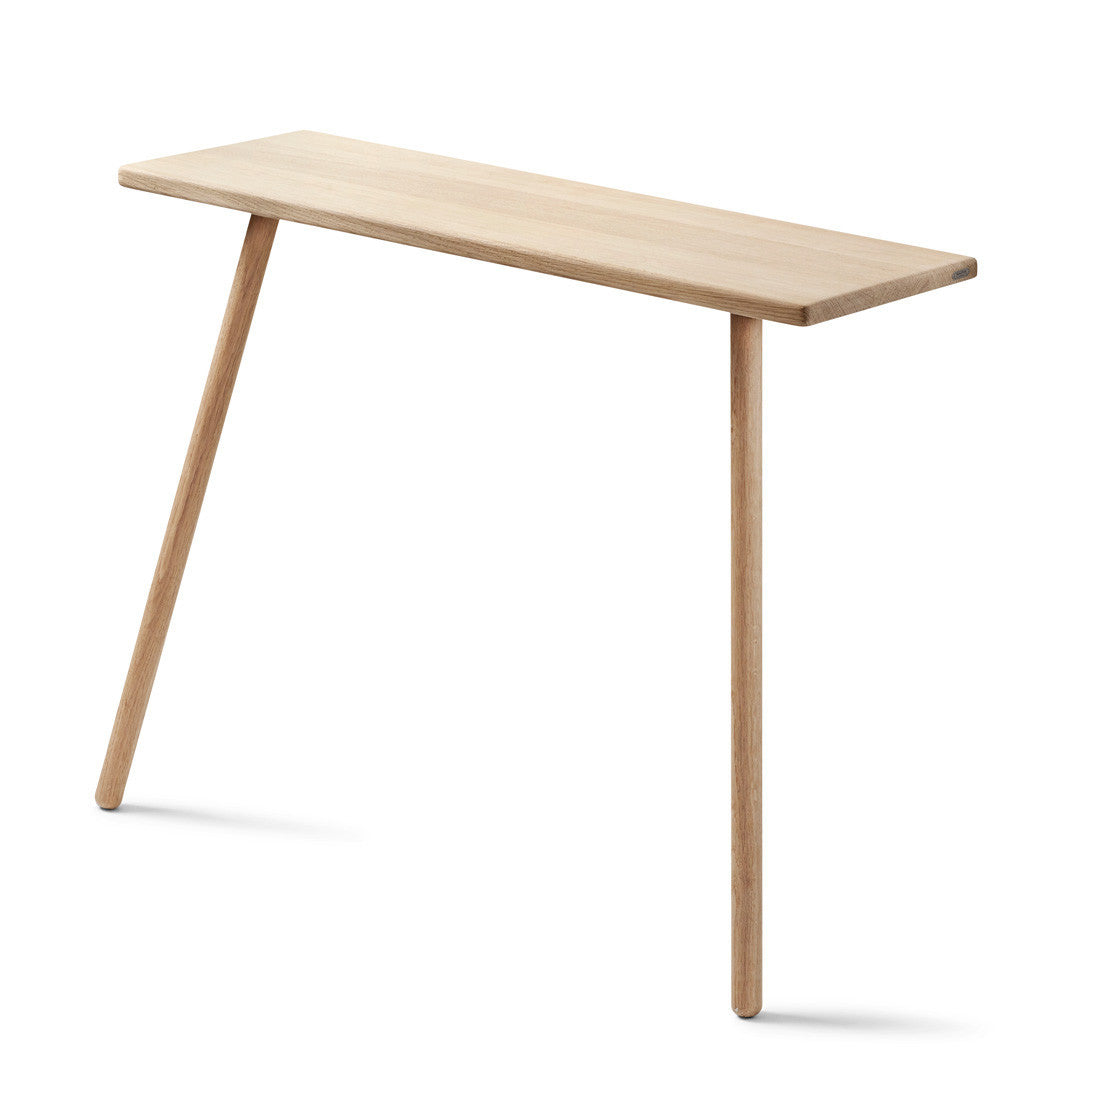 Georg Console Table by Skagerak